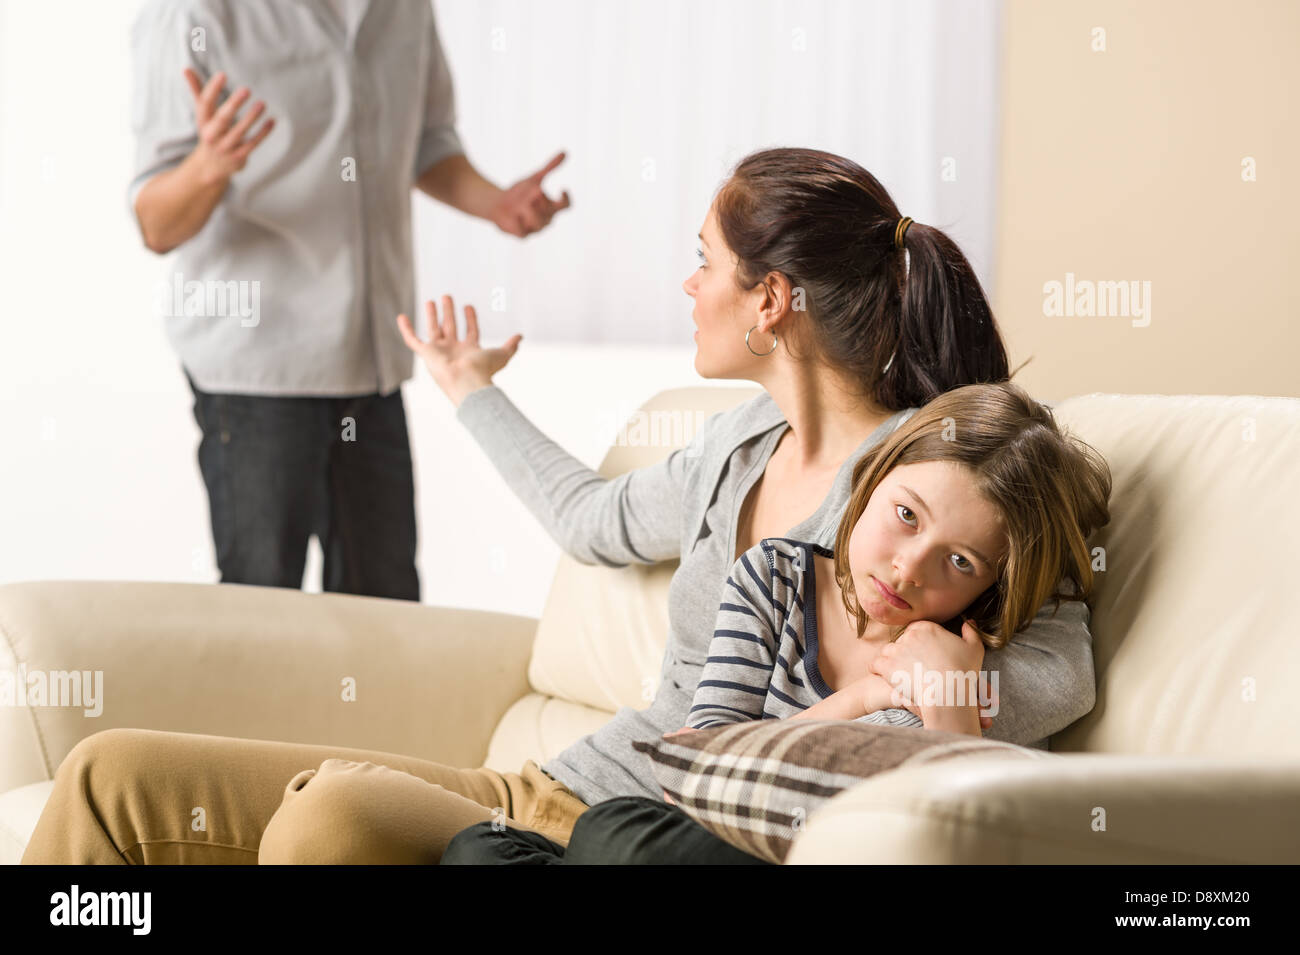 Arguing parents with upset little girl Stock Photo